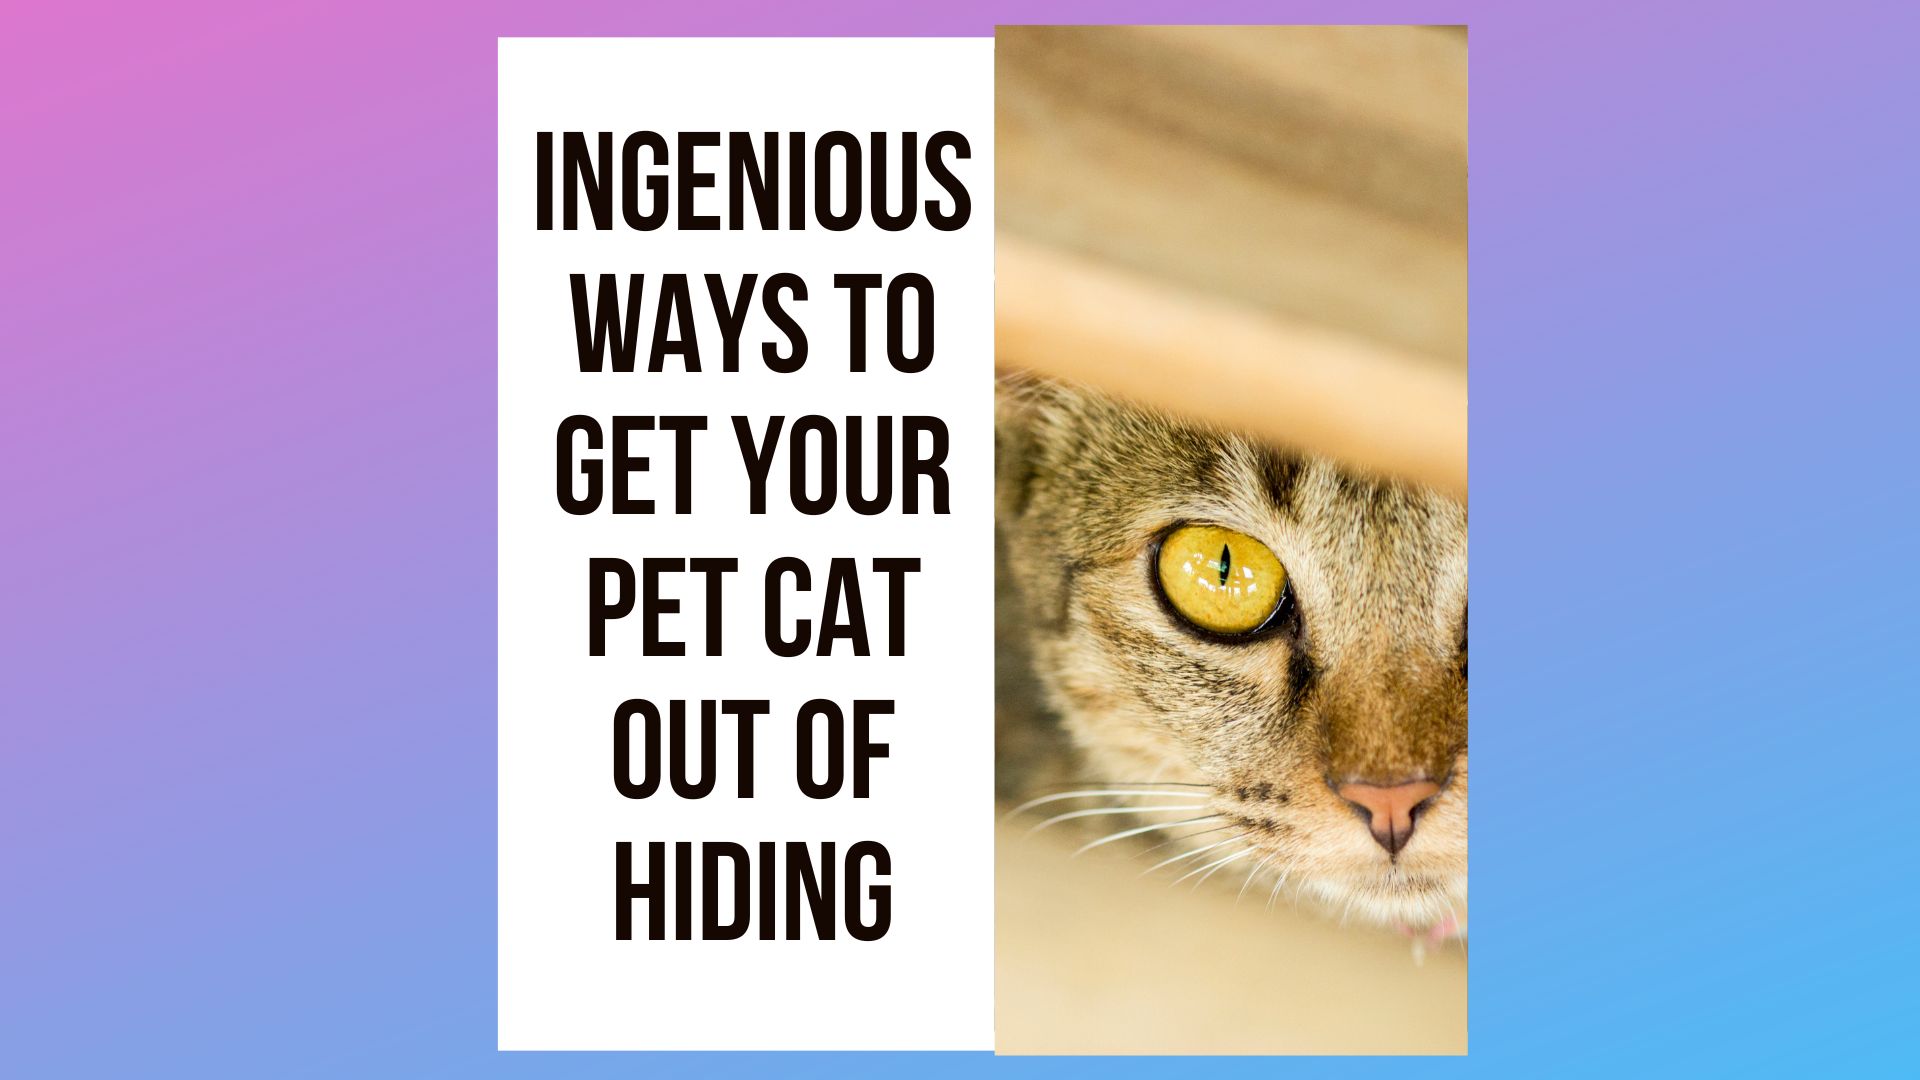 Ingenious Ways to Get Your Pet Cat Out of Hiding